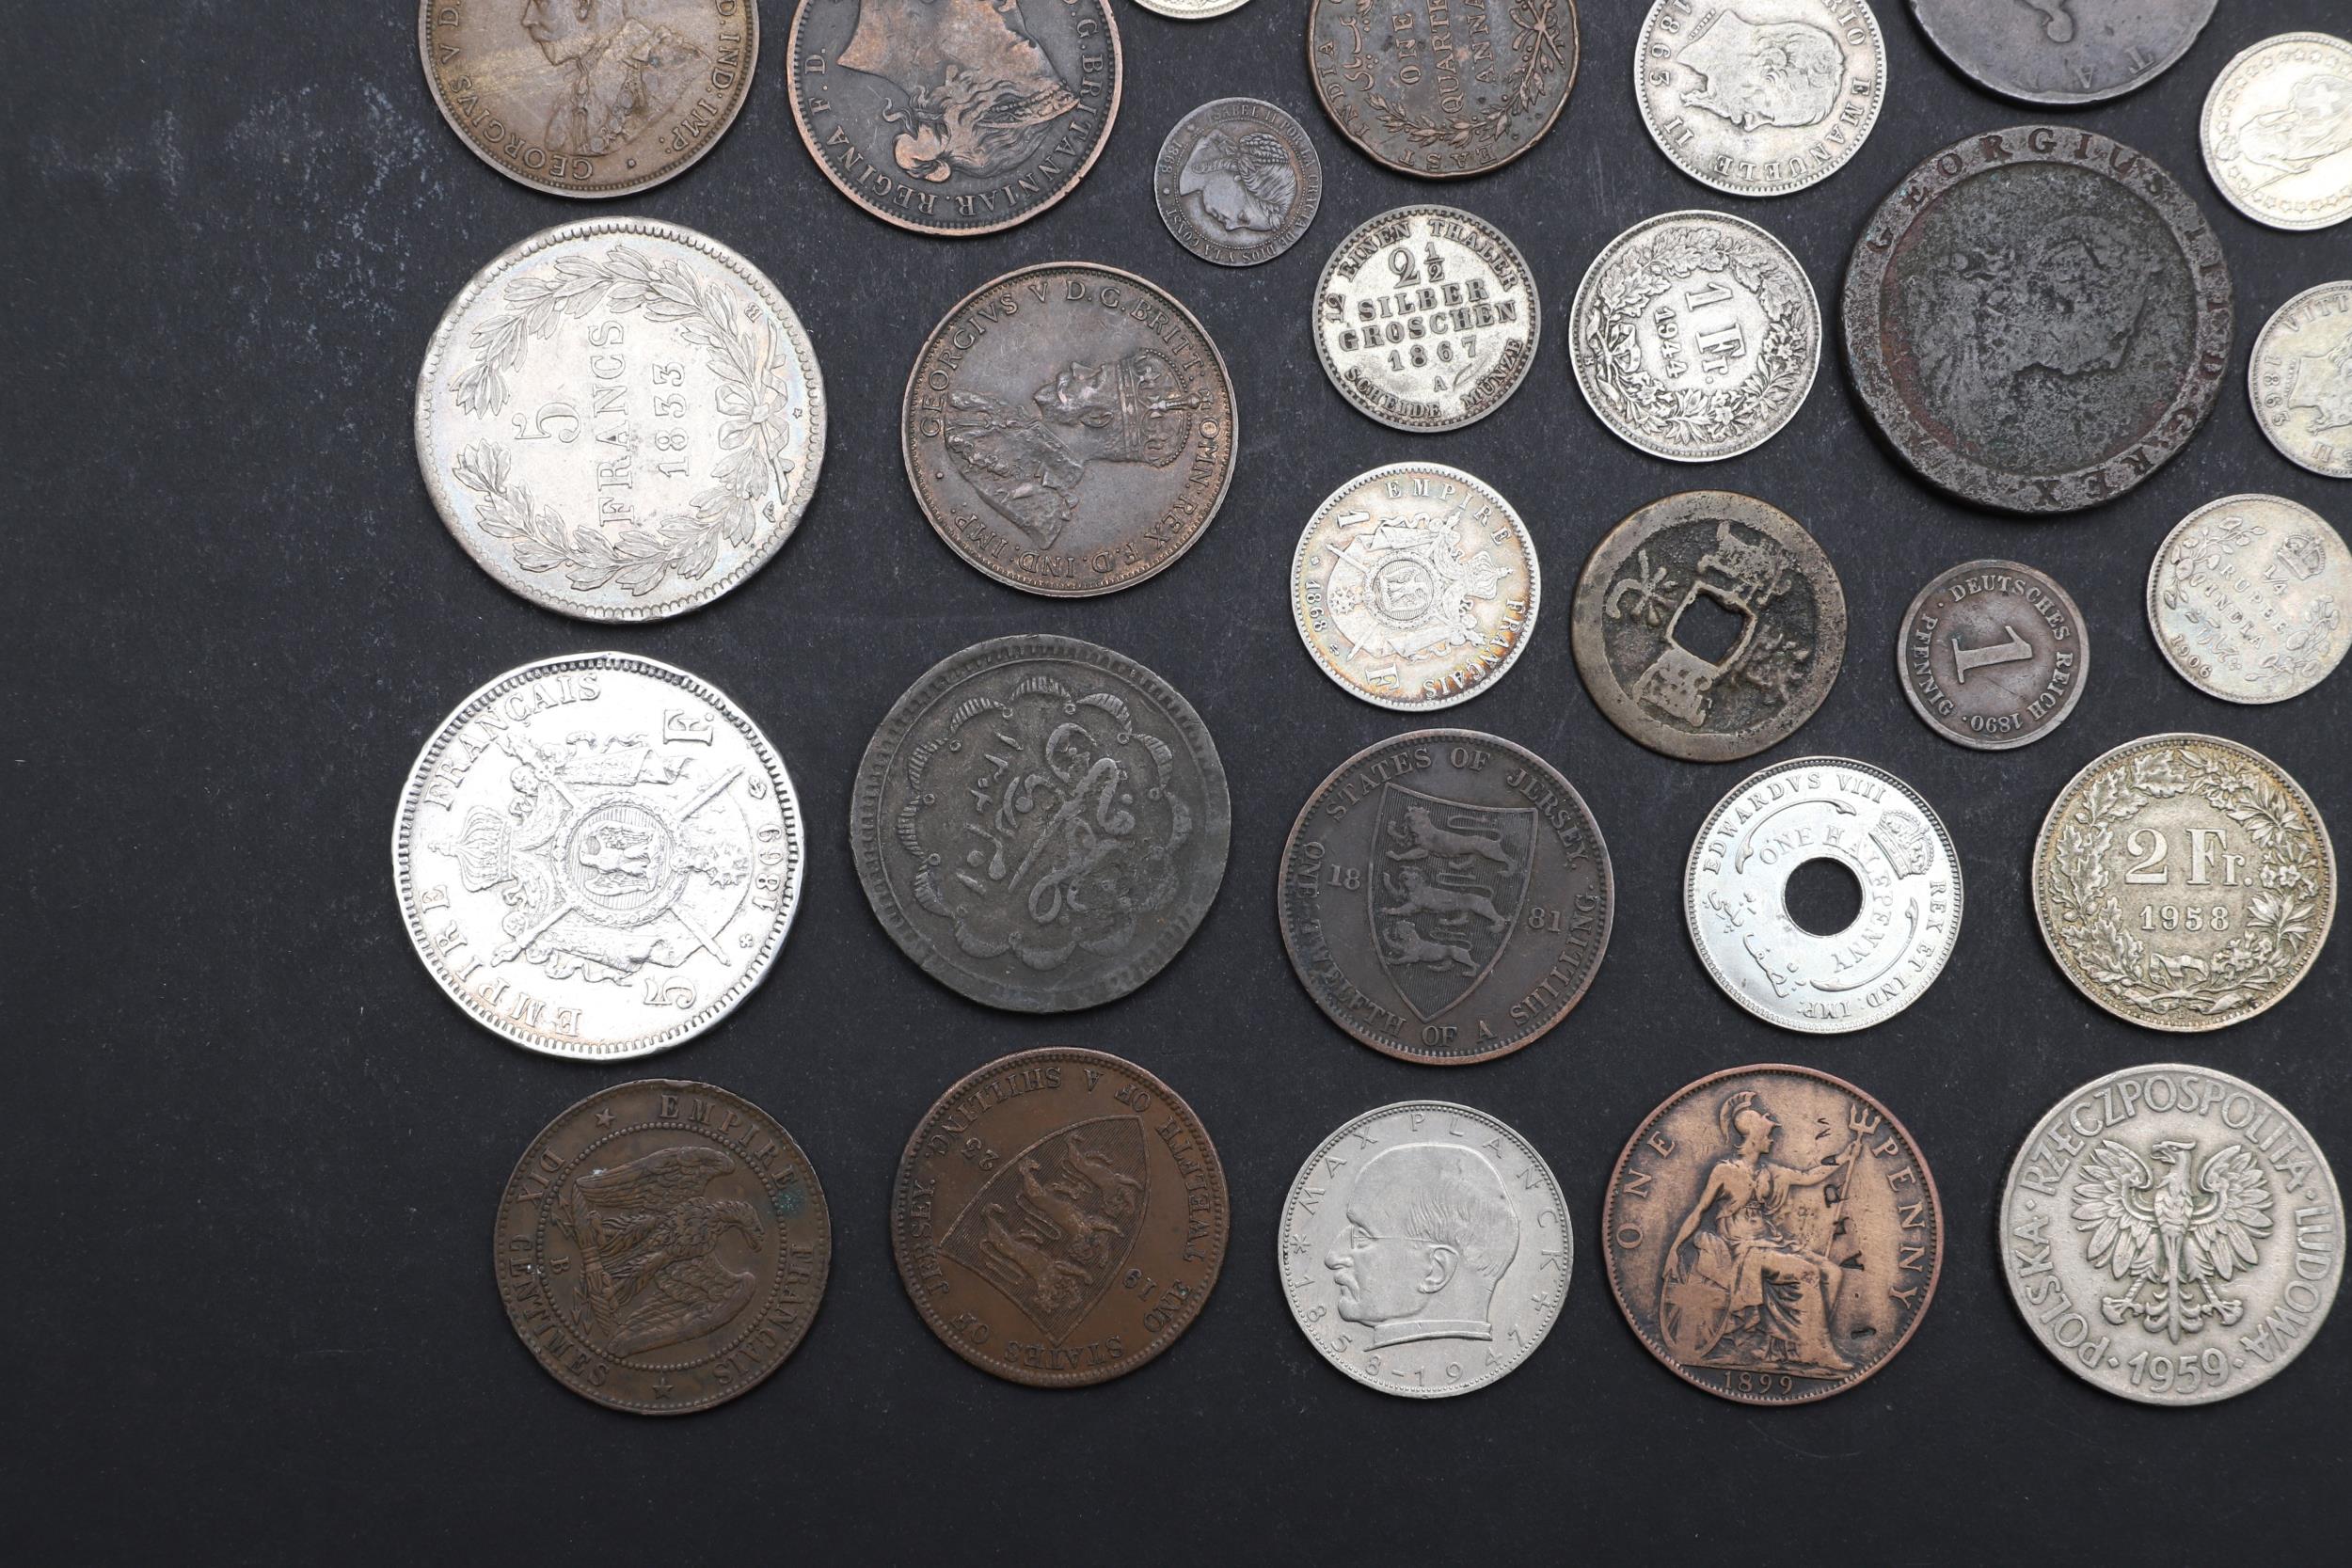 A COLLECTION OF WORLD COINS INCLUDING A NAPOLEON III 5 FRANC COIN. - Image 4 of 5